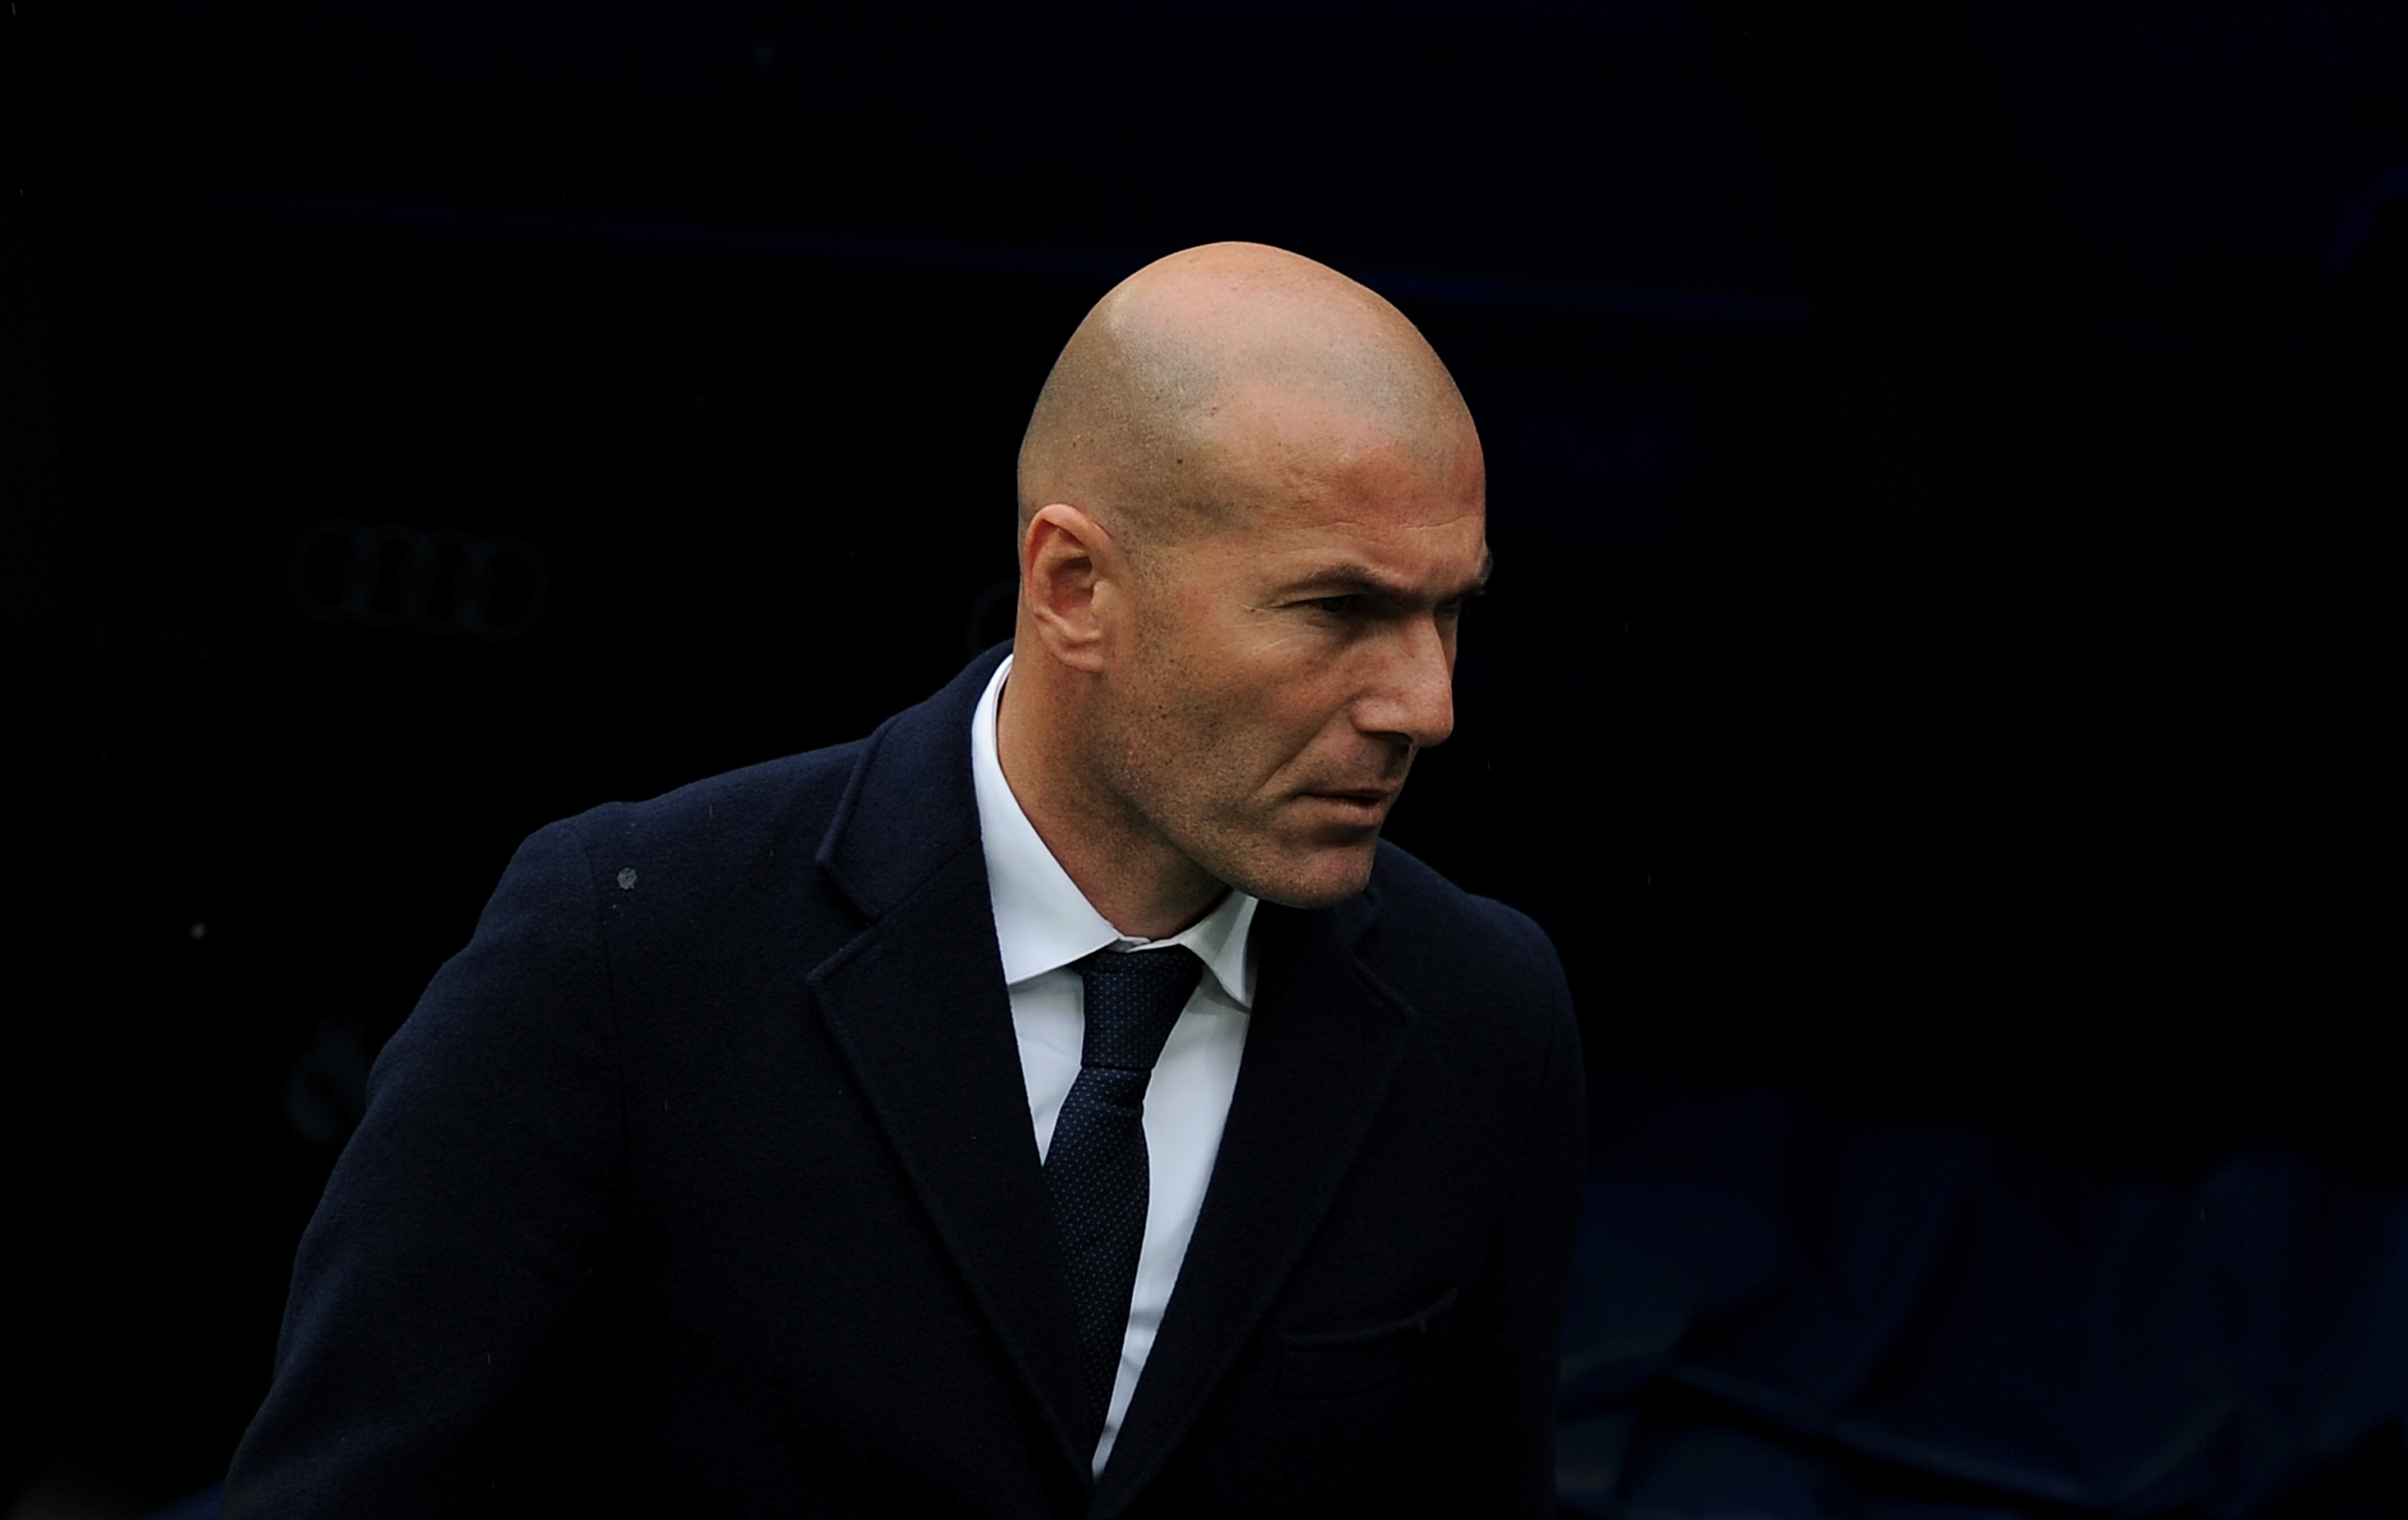 MADRID, SPAIN - MAY 08:  Real Madrid manager Zinedine Zidane looks on before the La Liga match between Real Madrid CF and Valencia CF at Estadio Santiago Bernabeu on May 8, 2016 in Madrid, Spain.  (Photo by Denis Doyle/Getty Images)